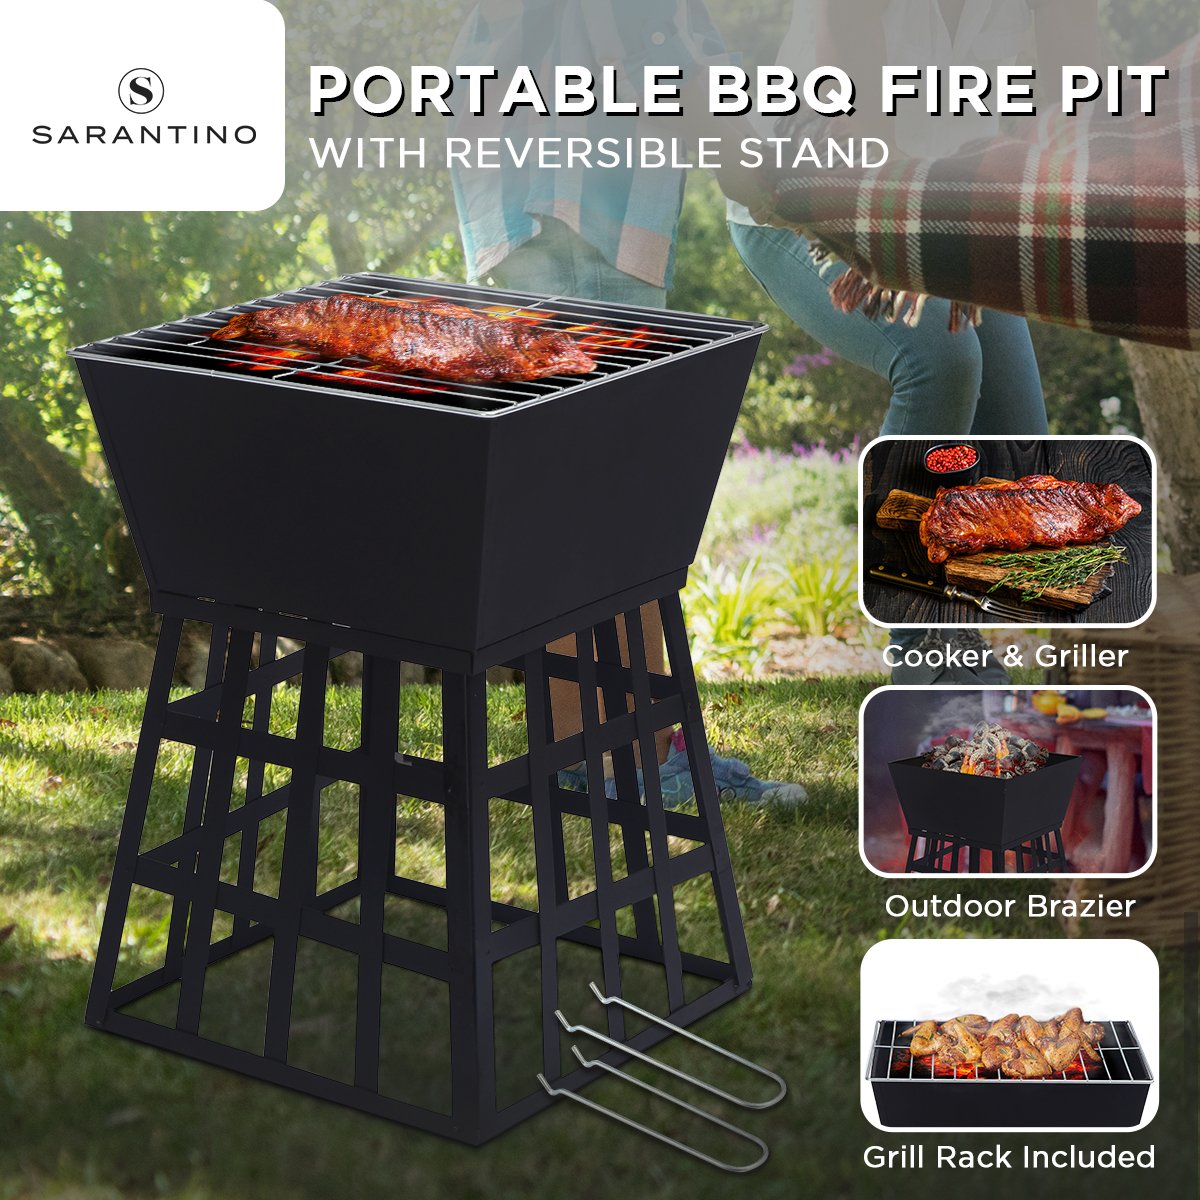 Wallaroo Outdoor Fire Pit for BBQ, Grilling, Cooking, Camping-Portable